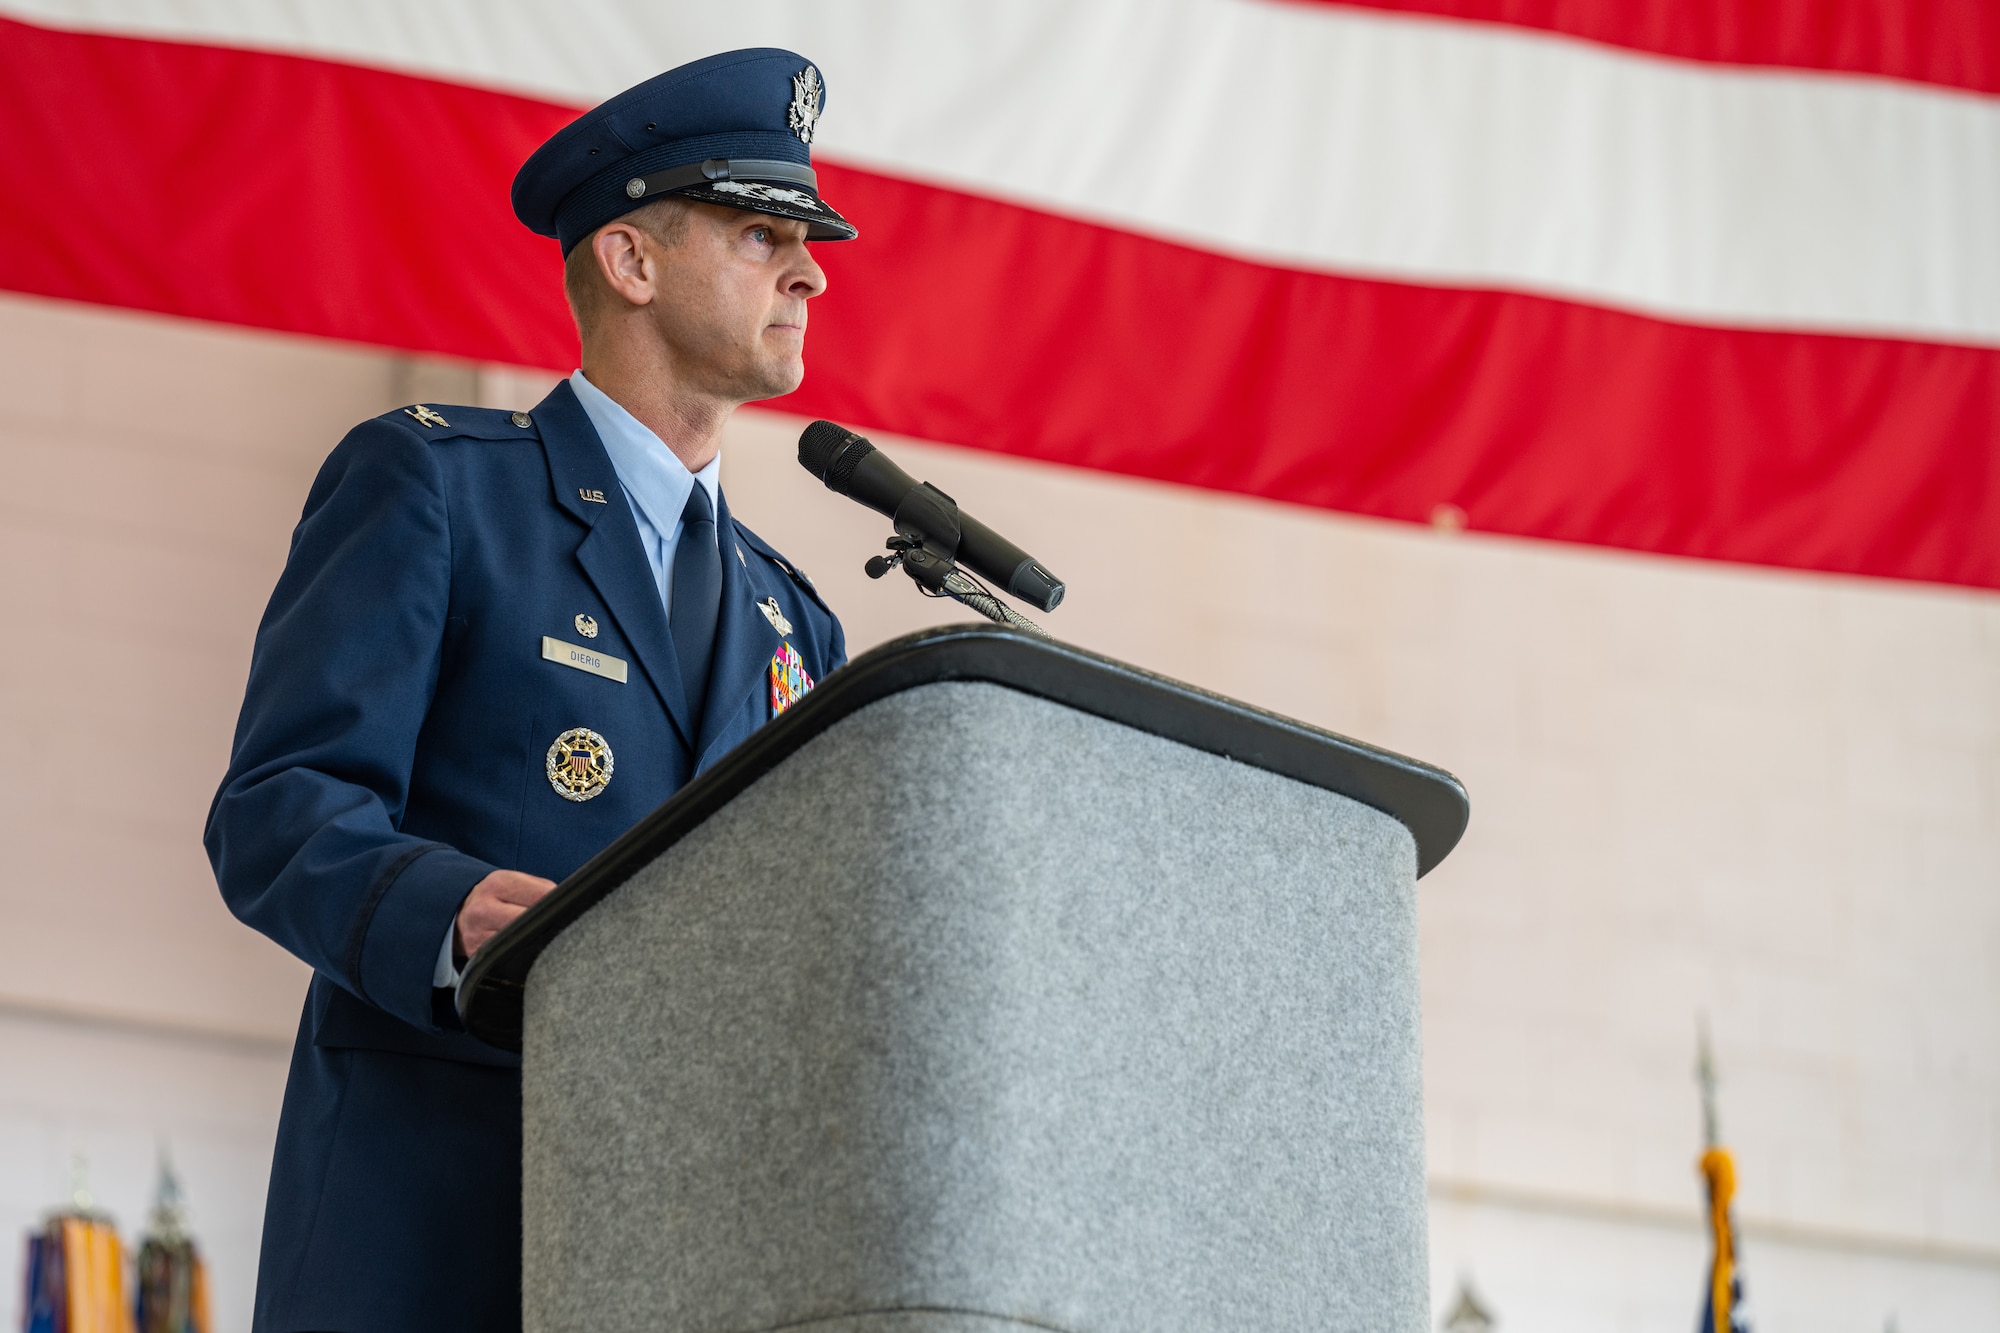 U.S. Air Force Col. Patrick Dierig, 1st Special Operations Wing commander, gives closing remarks during the 1st SOW change of command ceremony